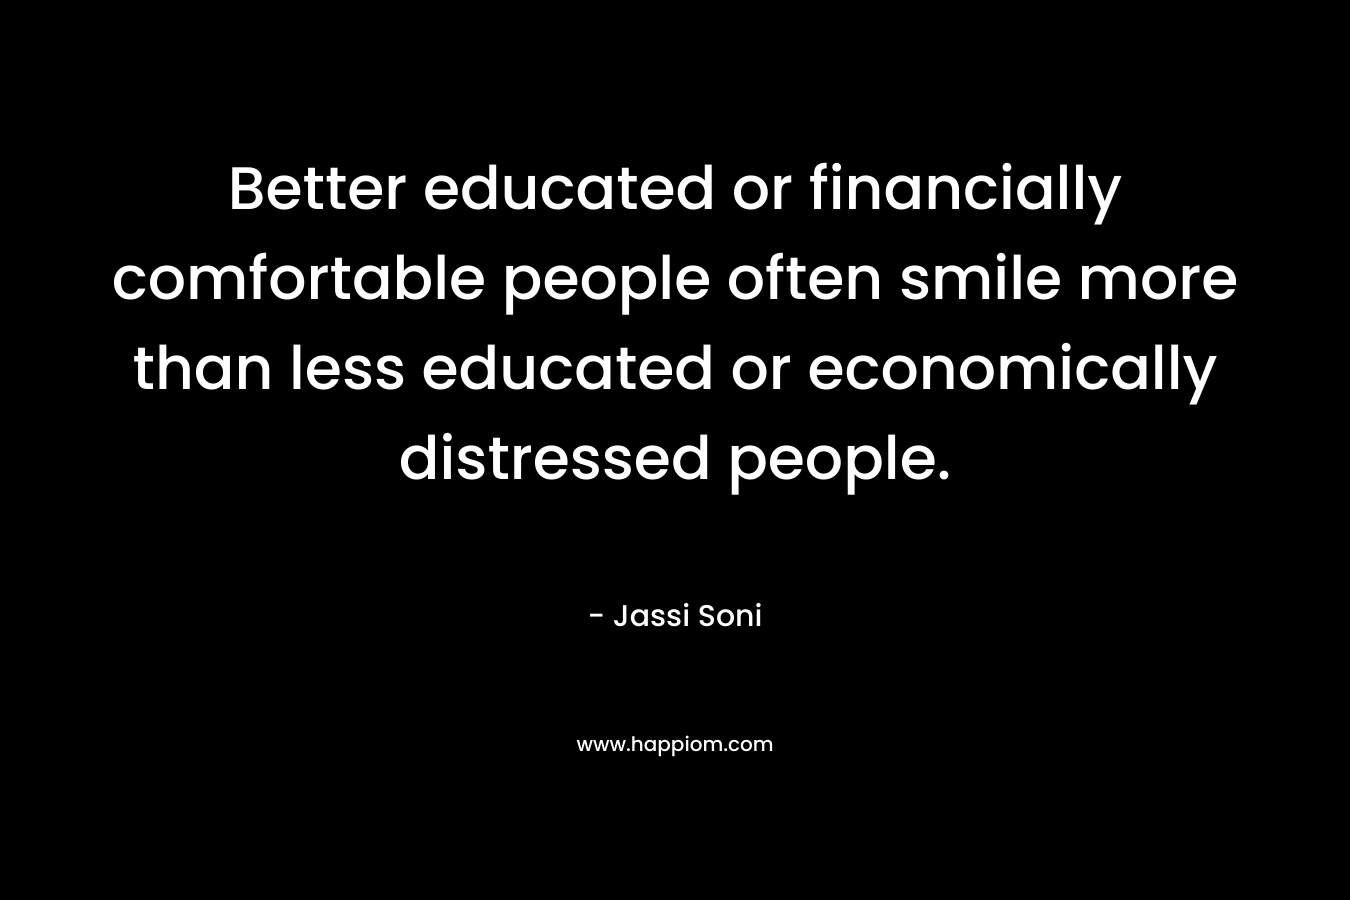 Better educated or financially comfortable people often smile more than less educated or economically distressed people. – Jassi Soni